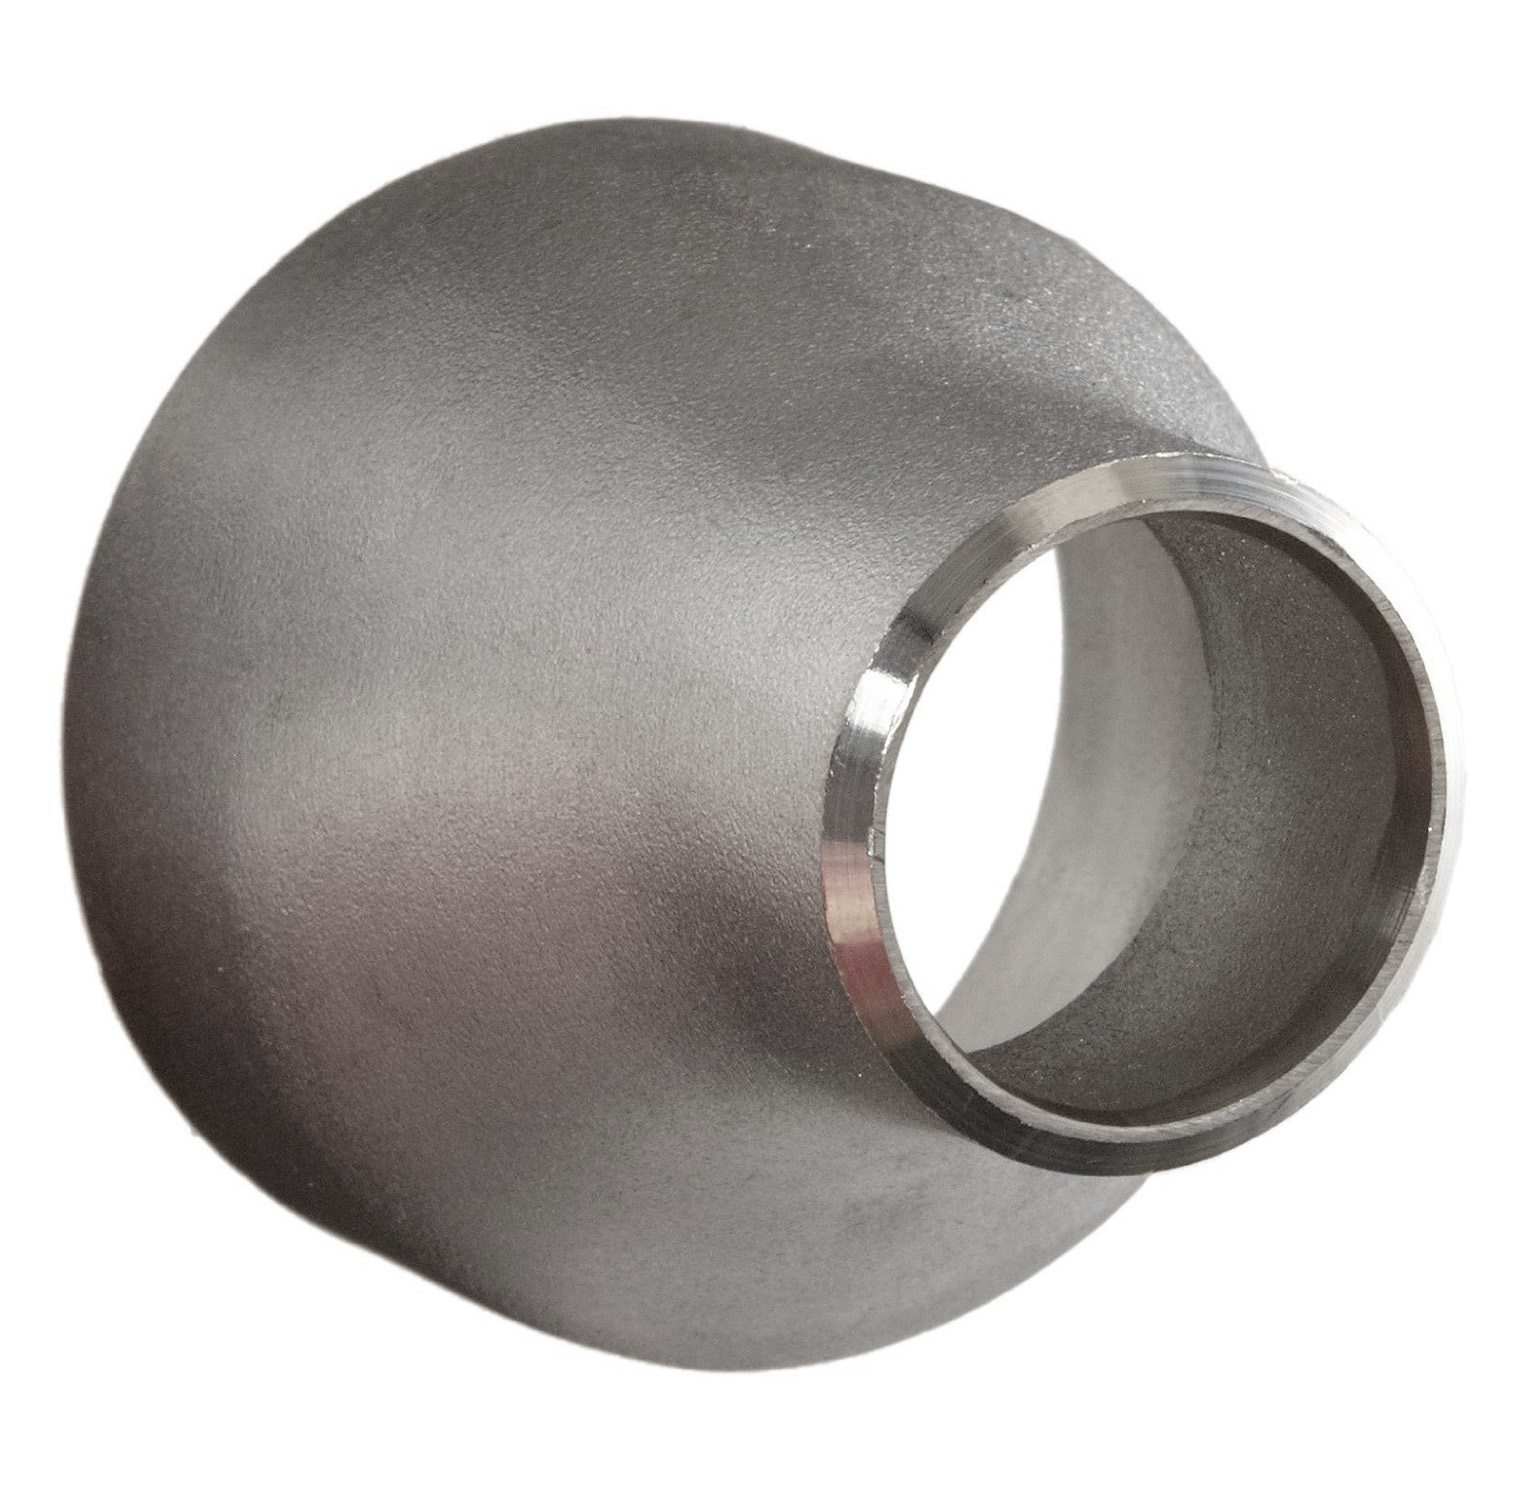 Stainless Steel Butt Weld Eccentric Reducers